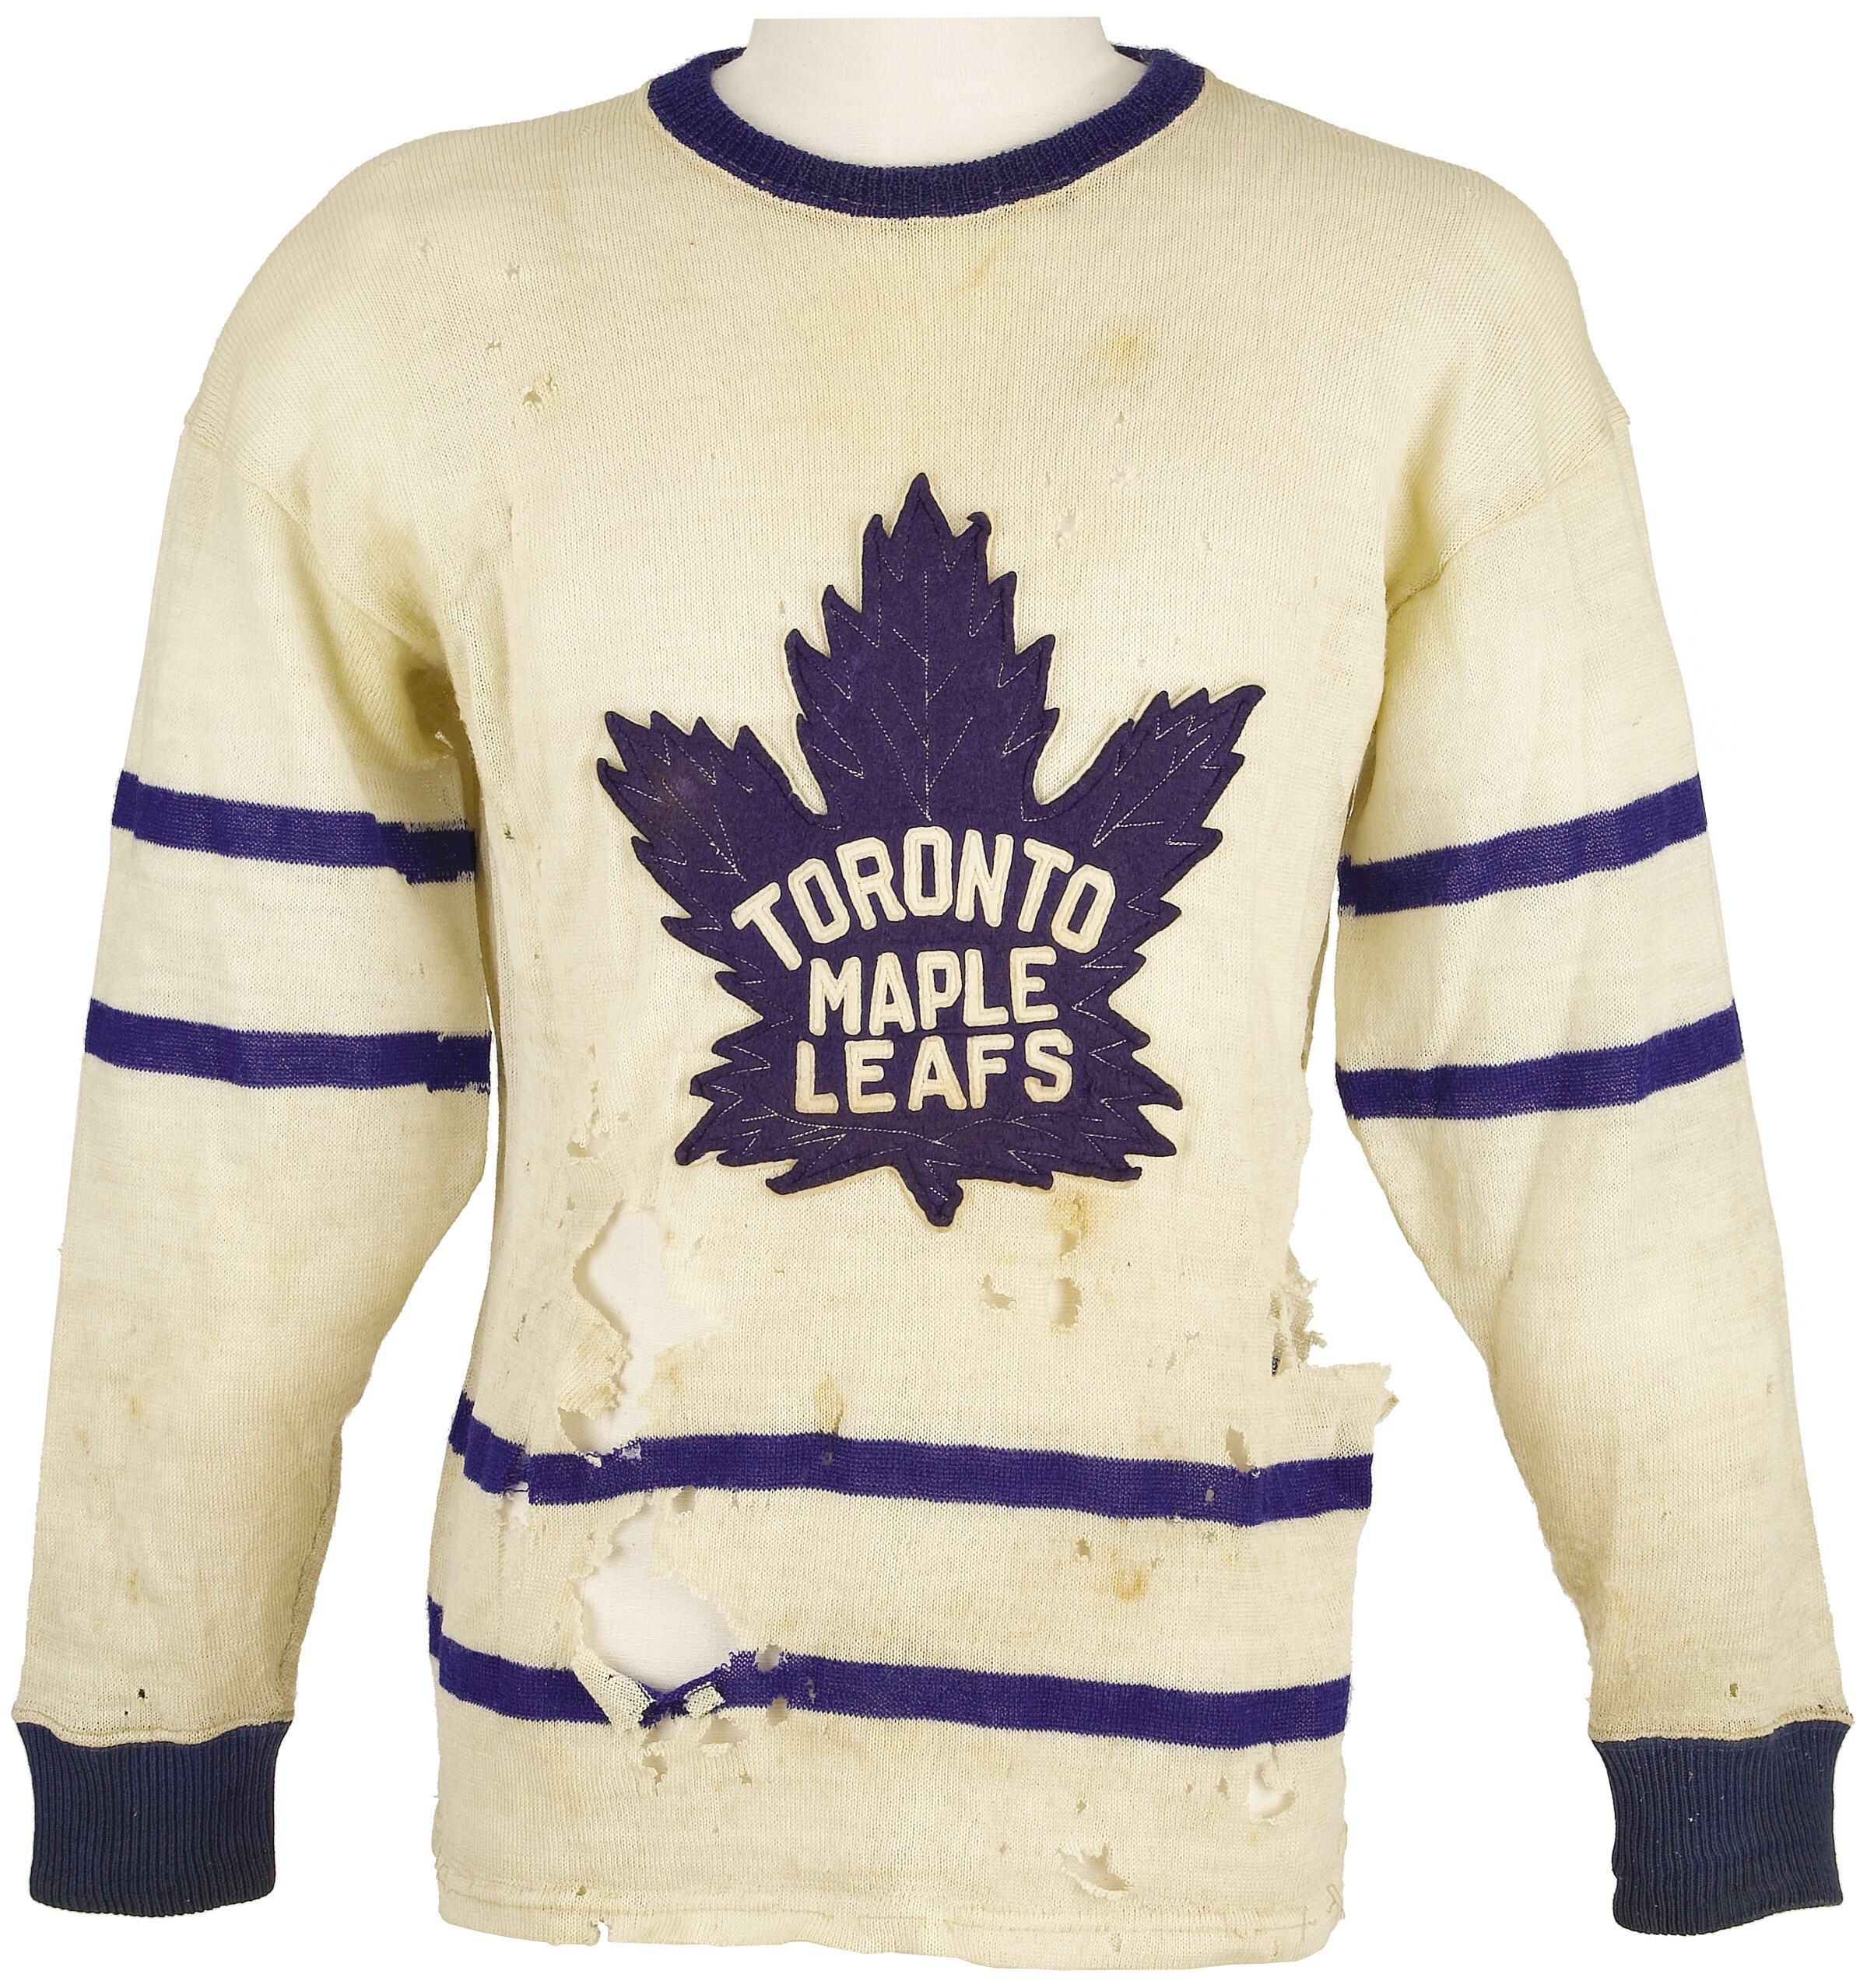 50 MISSION SWEATER Bill Barilko & The Tragically Hip Signed Toronto Maple  Leafs Vintage Wool Jersey